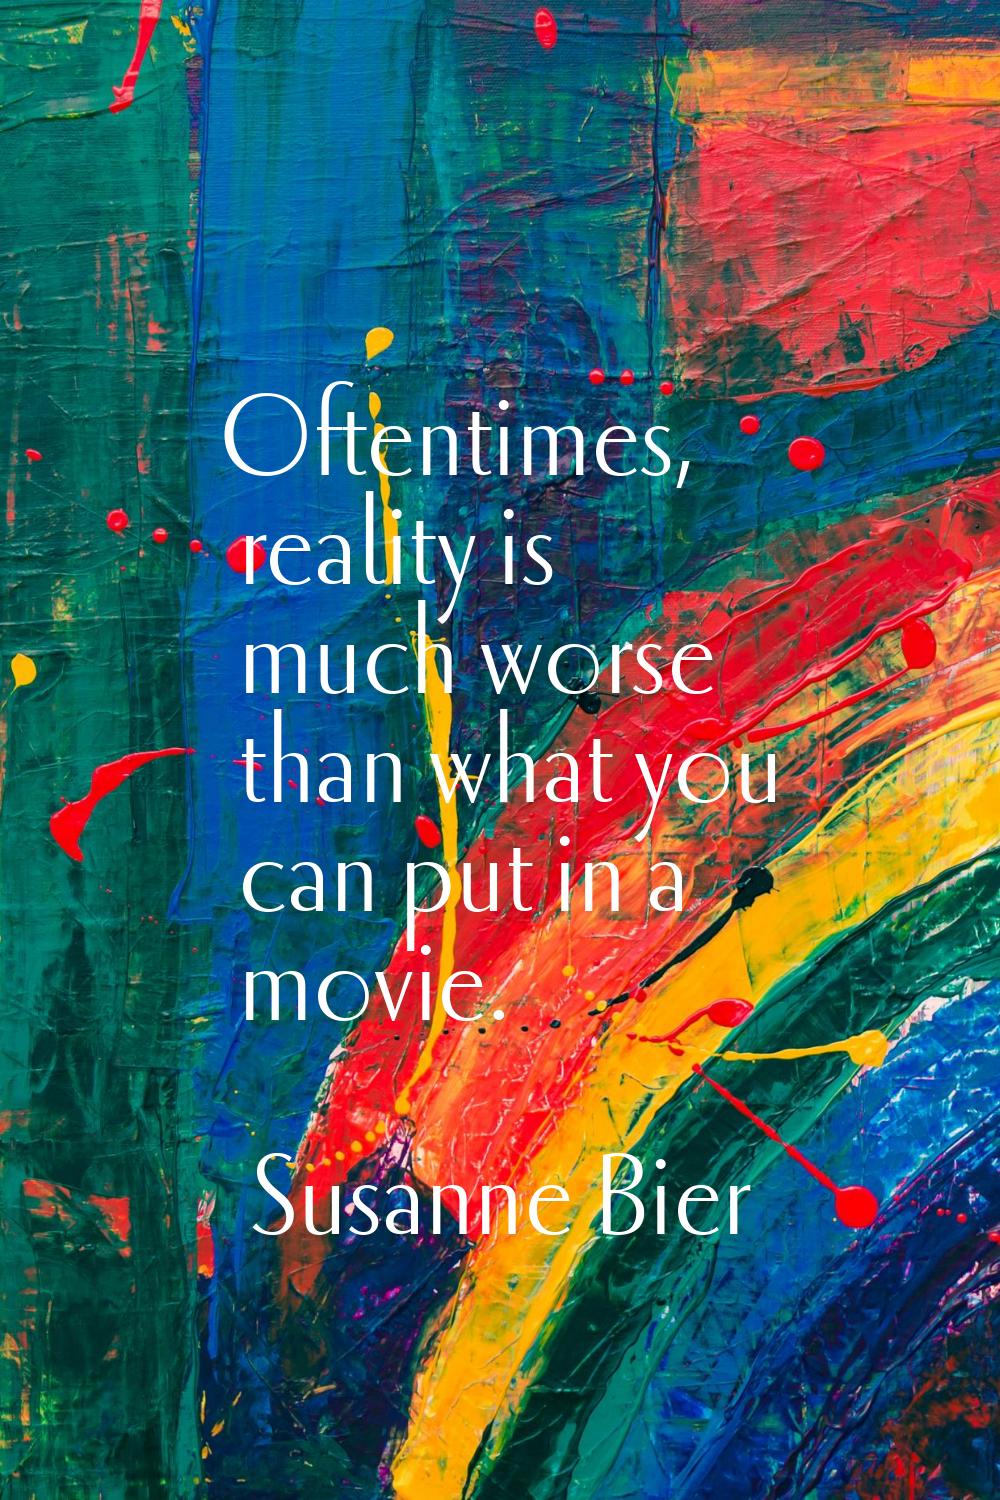 Oftentimes, reality is much worse than what you can put in a movie.